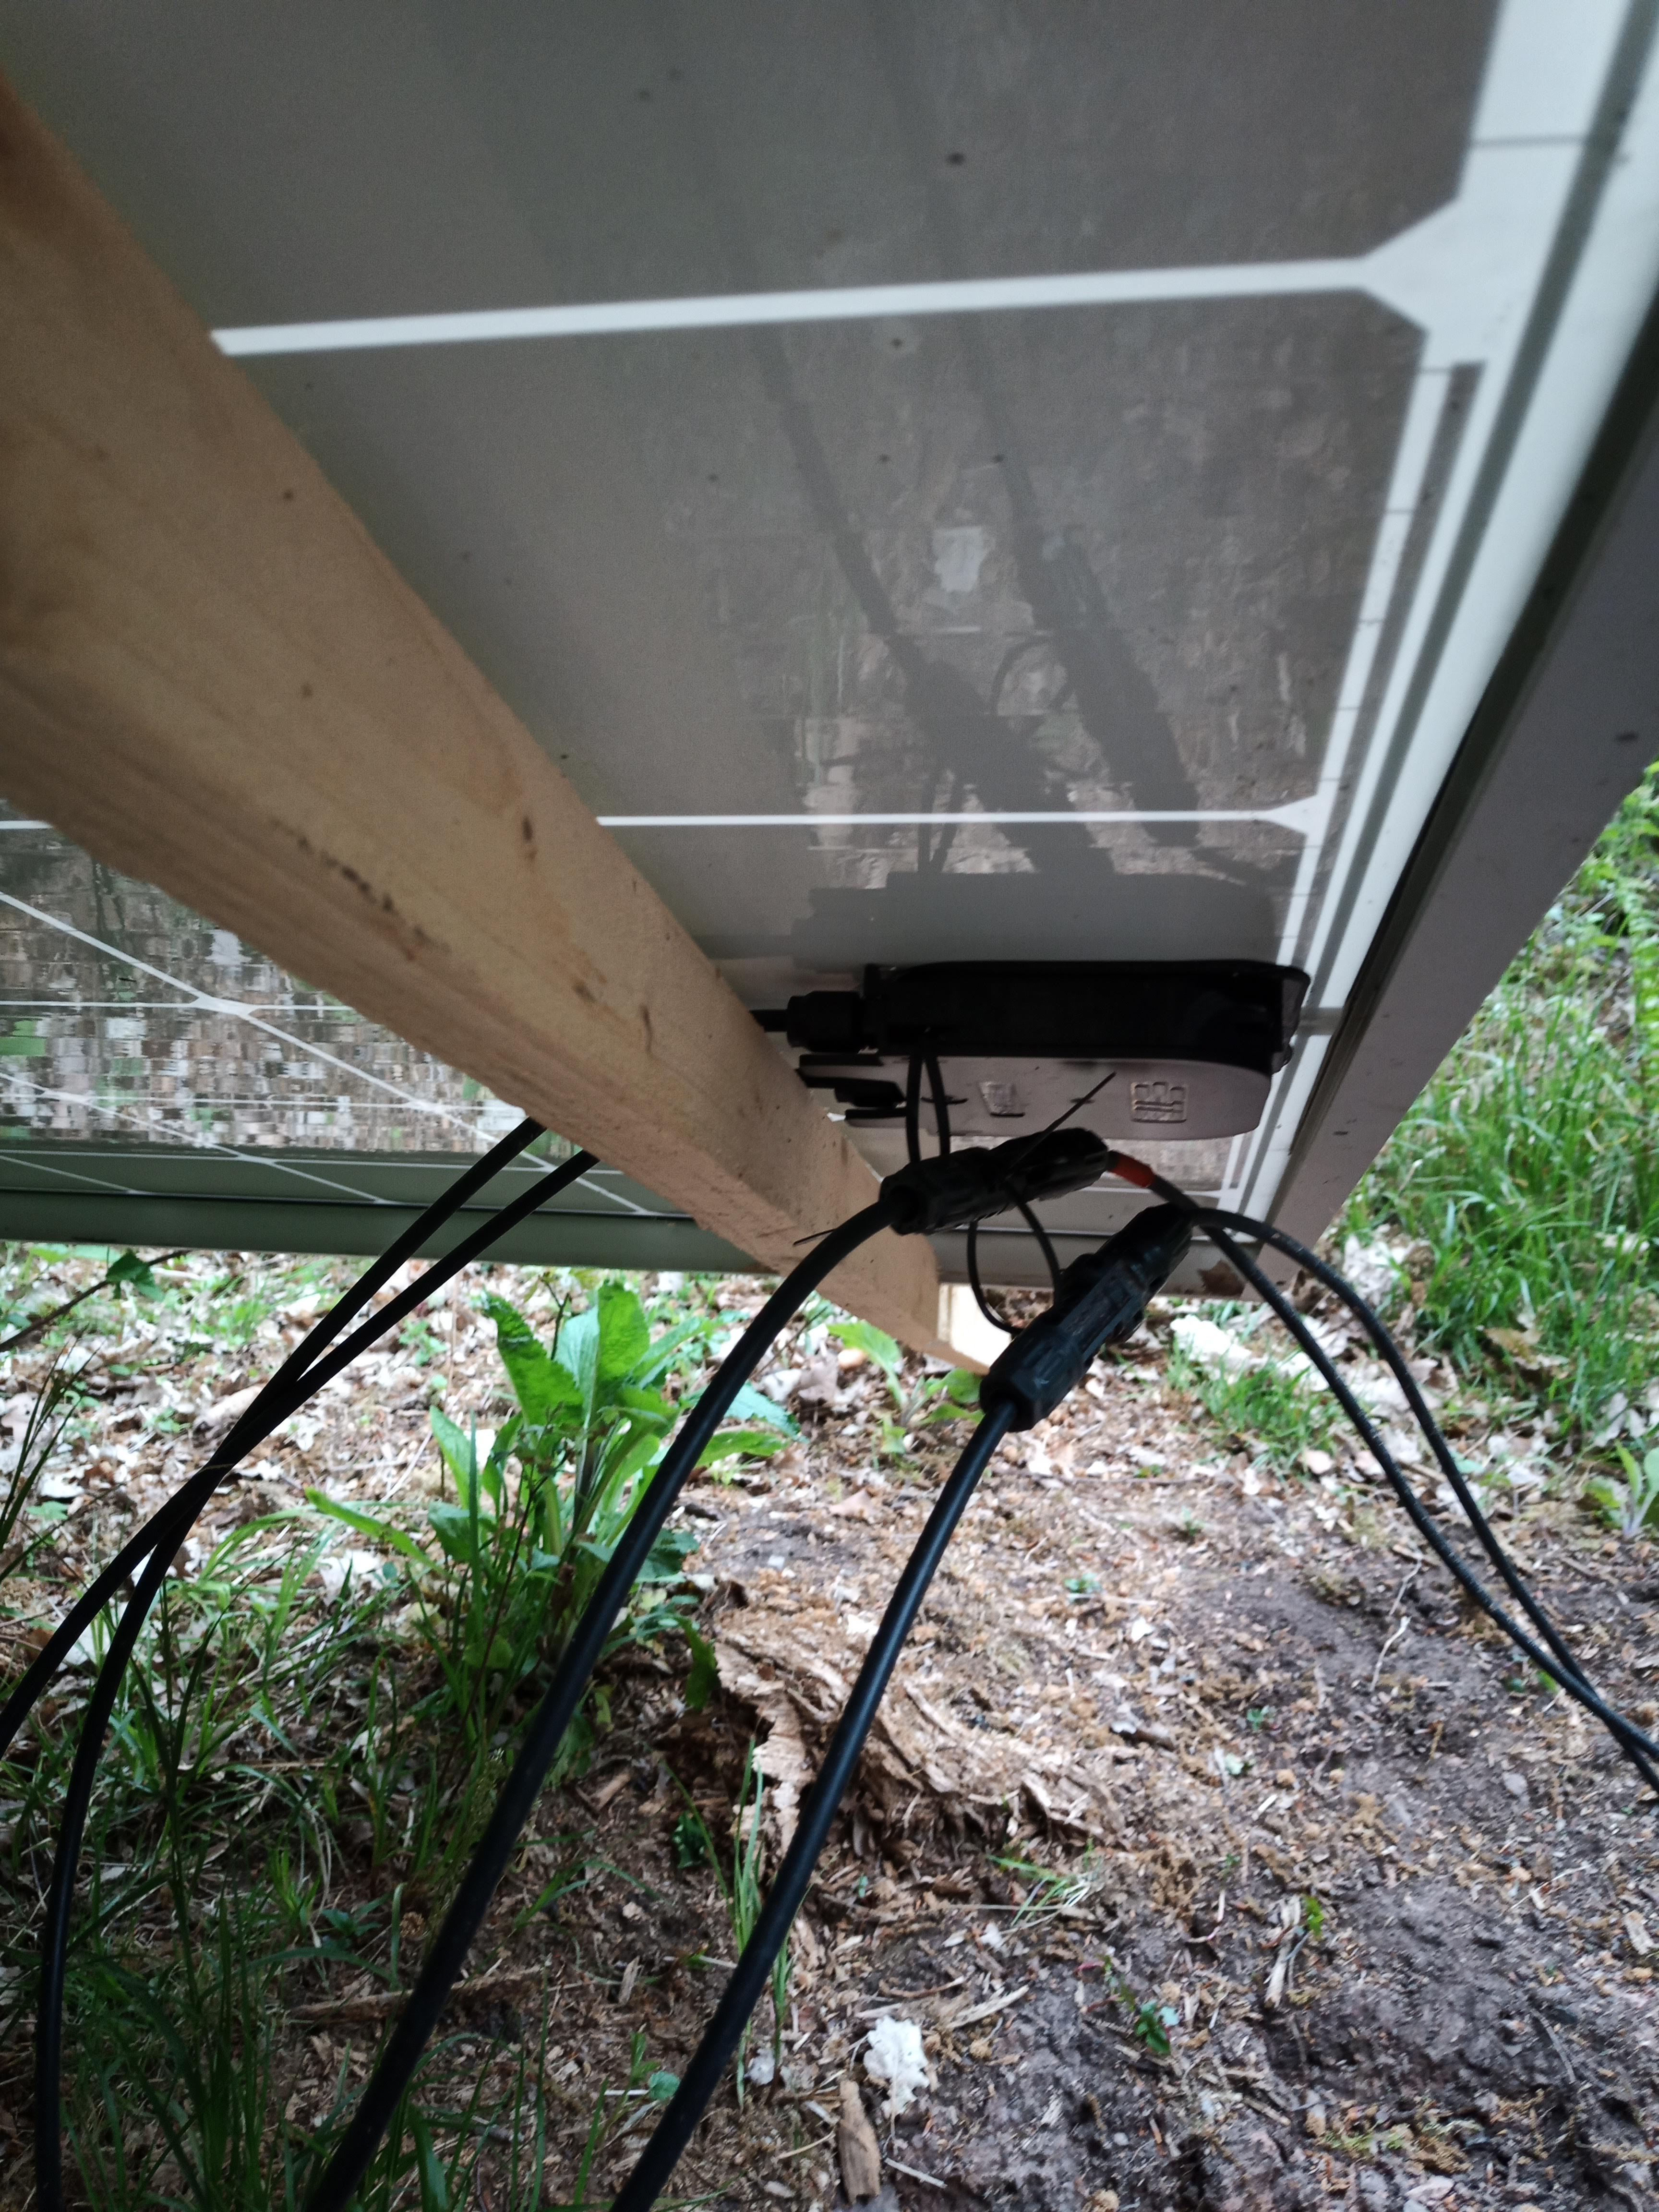 Attach the solar connectors to the panel.